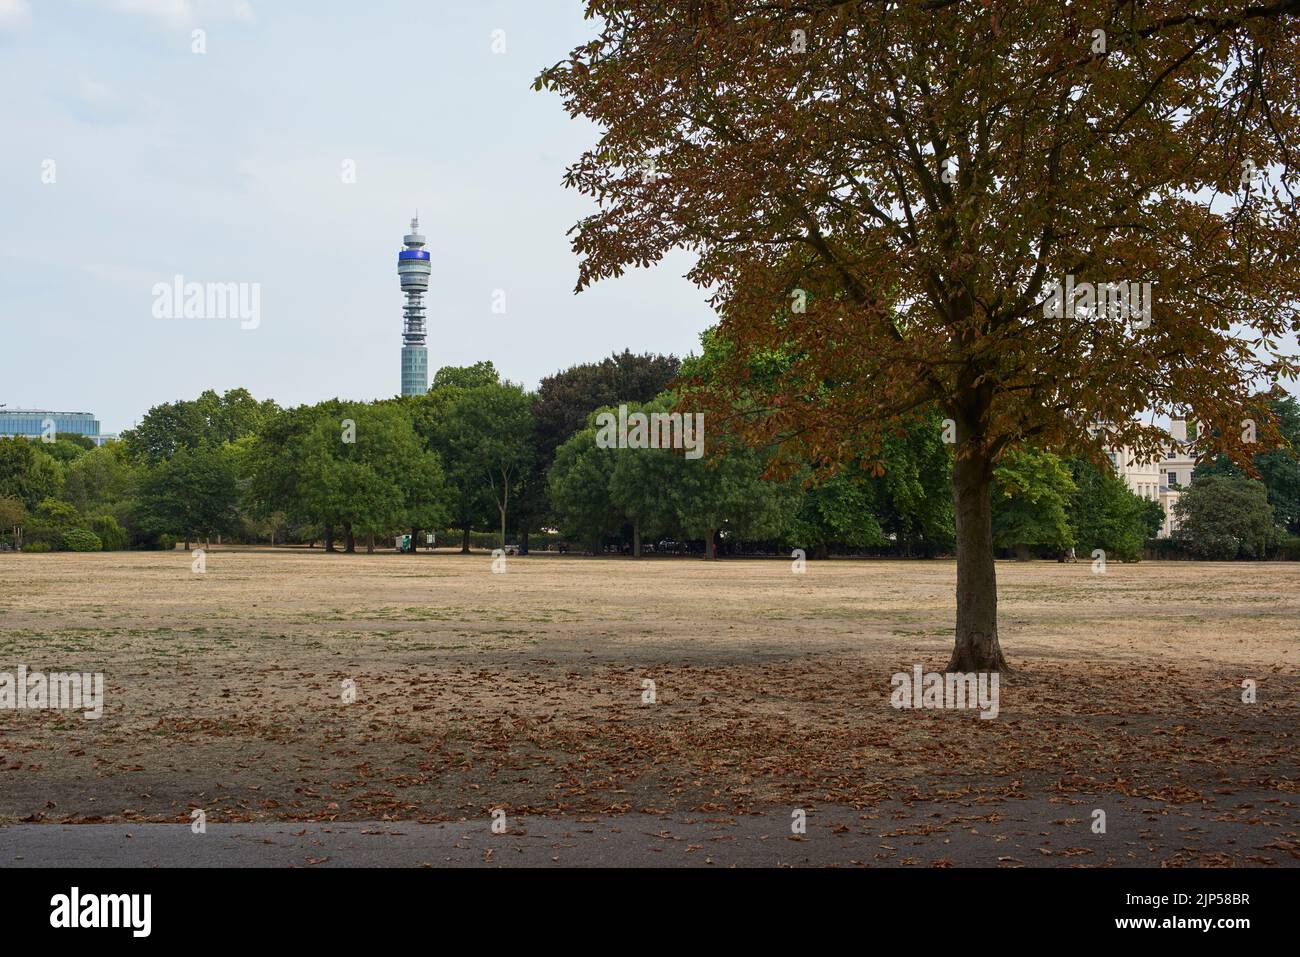 Regent's Park, central London UK, during the drought conditions prevalent in the August 2022 heatwave Stock Photo